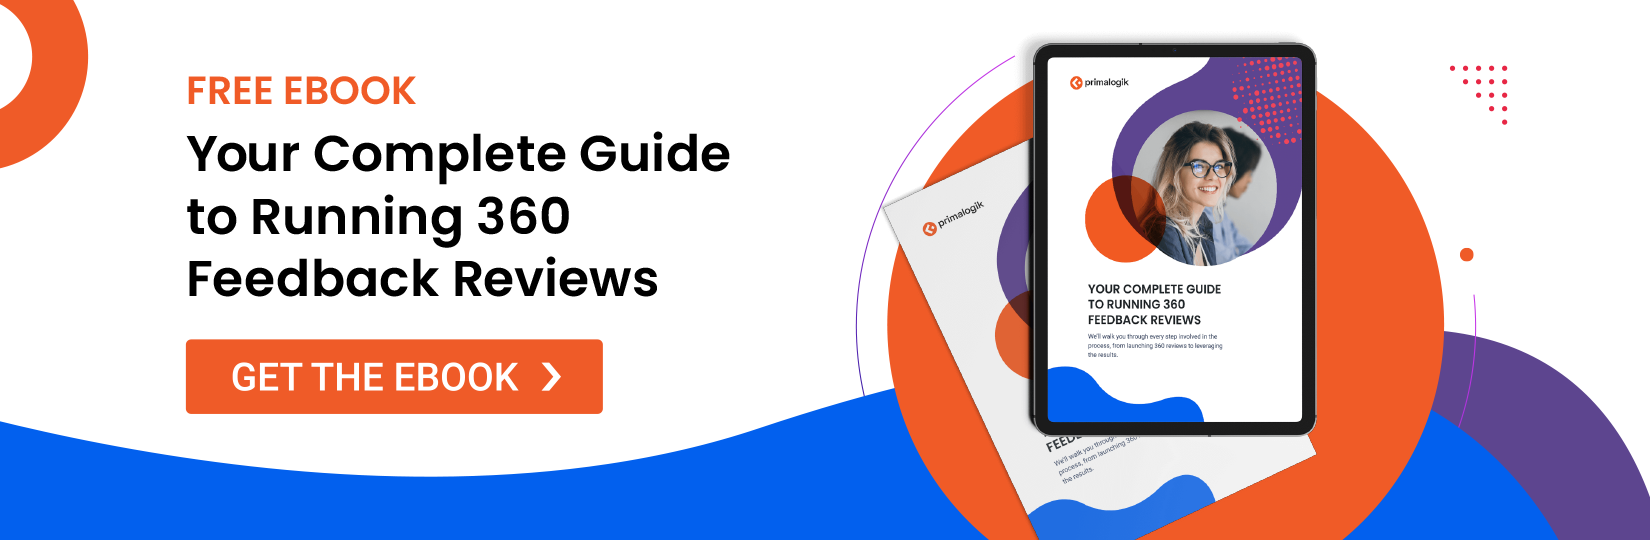 Your Complete Guide to Running 360 Feedback Reviews Ebook